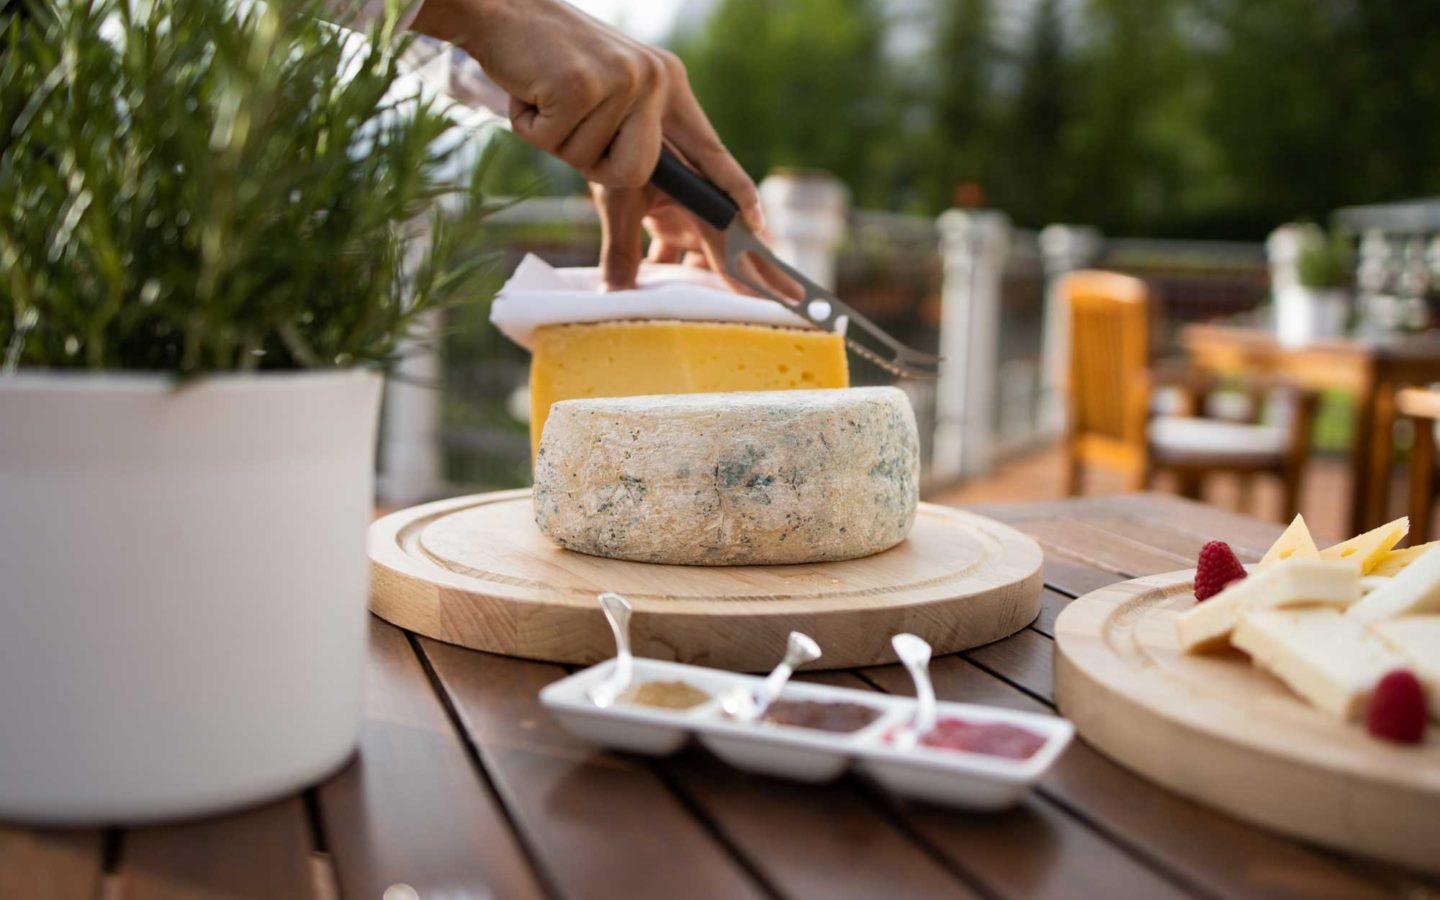 hand holding knife above block of cheese on wooden table